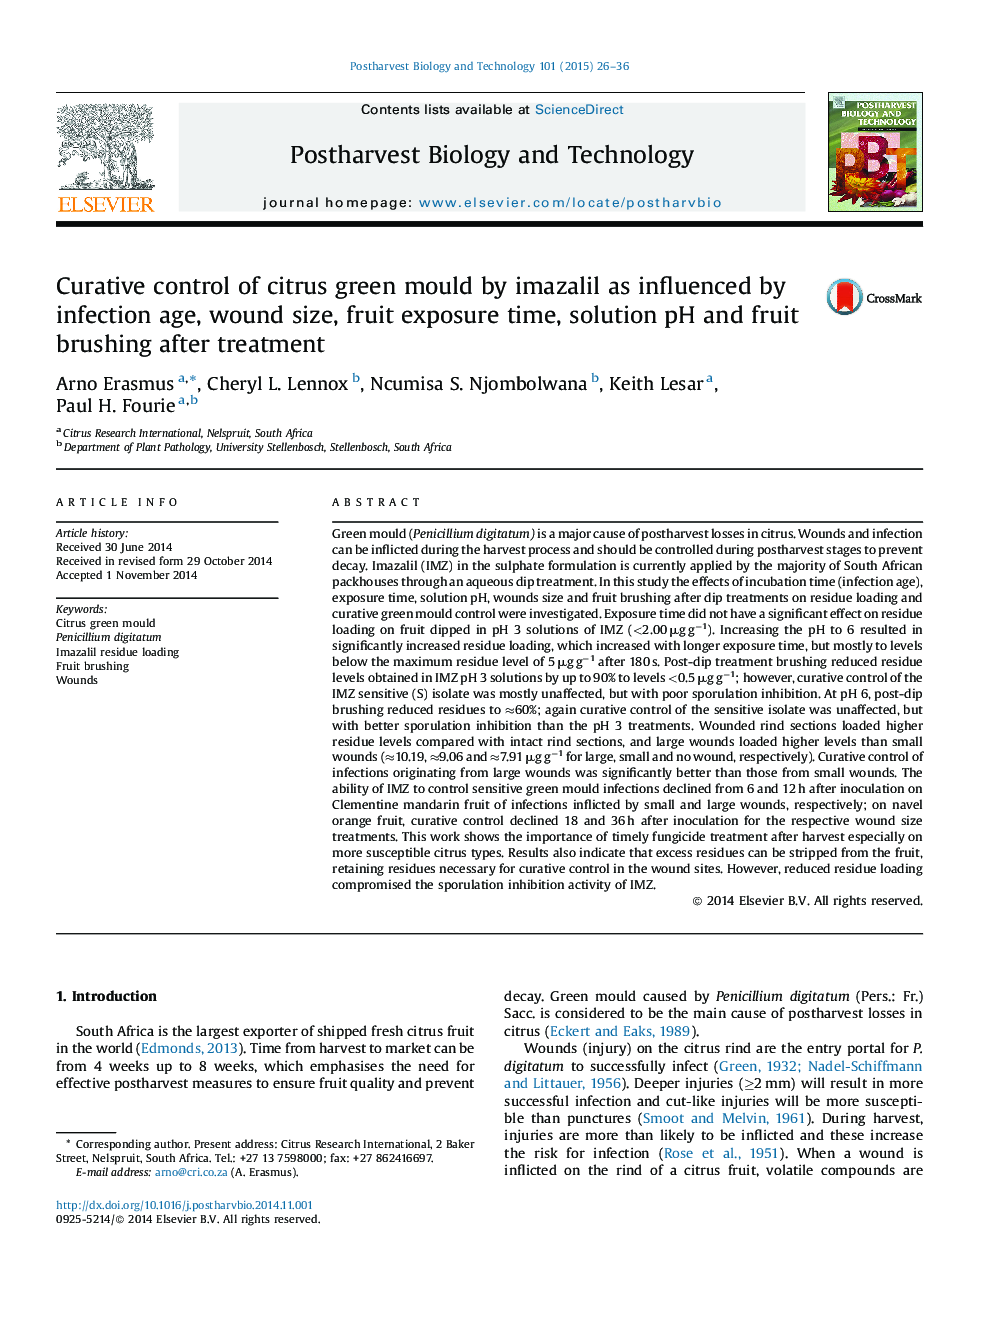 Curative control of citrus green mould by imazalil as influenced by infection age, wound size, fruit exposure time, solution pH and fruit brushing after treatment